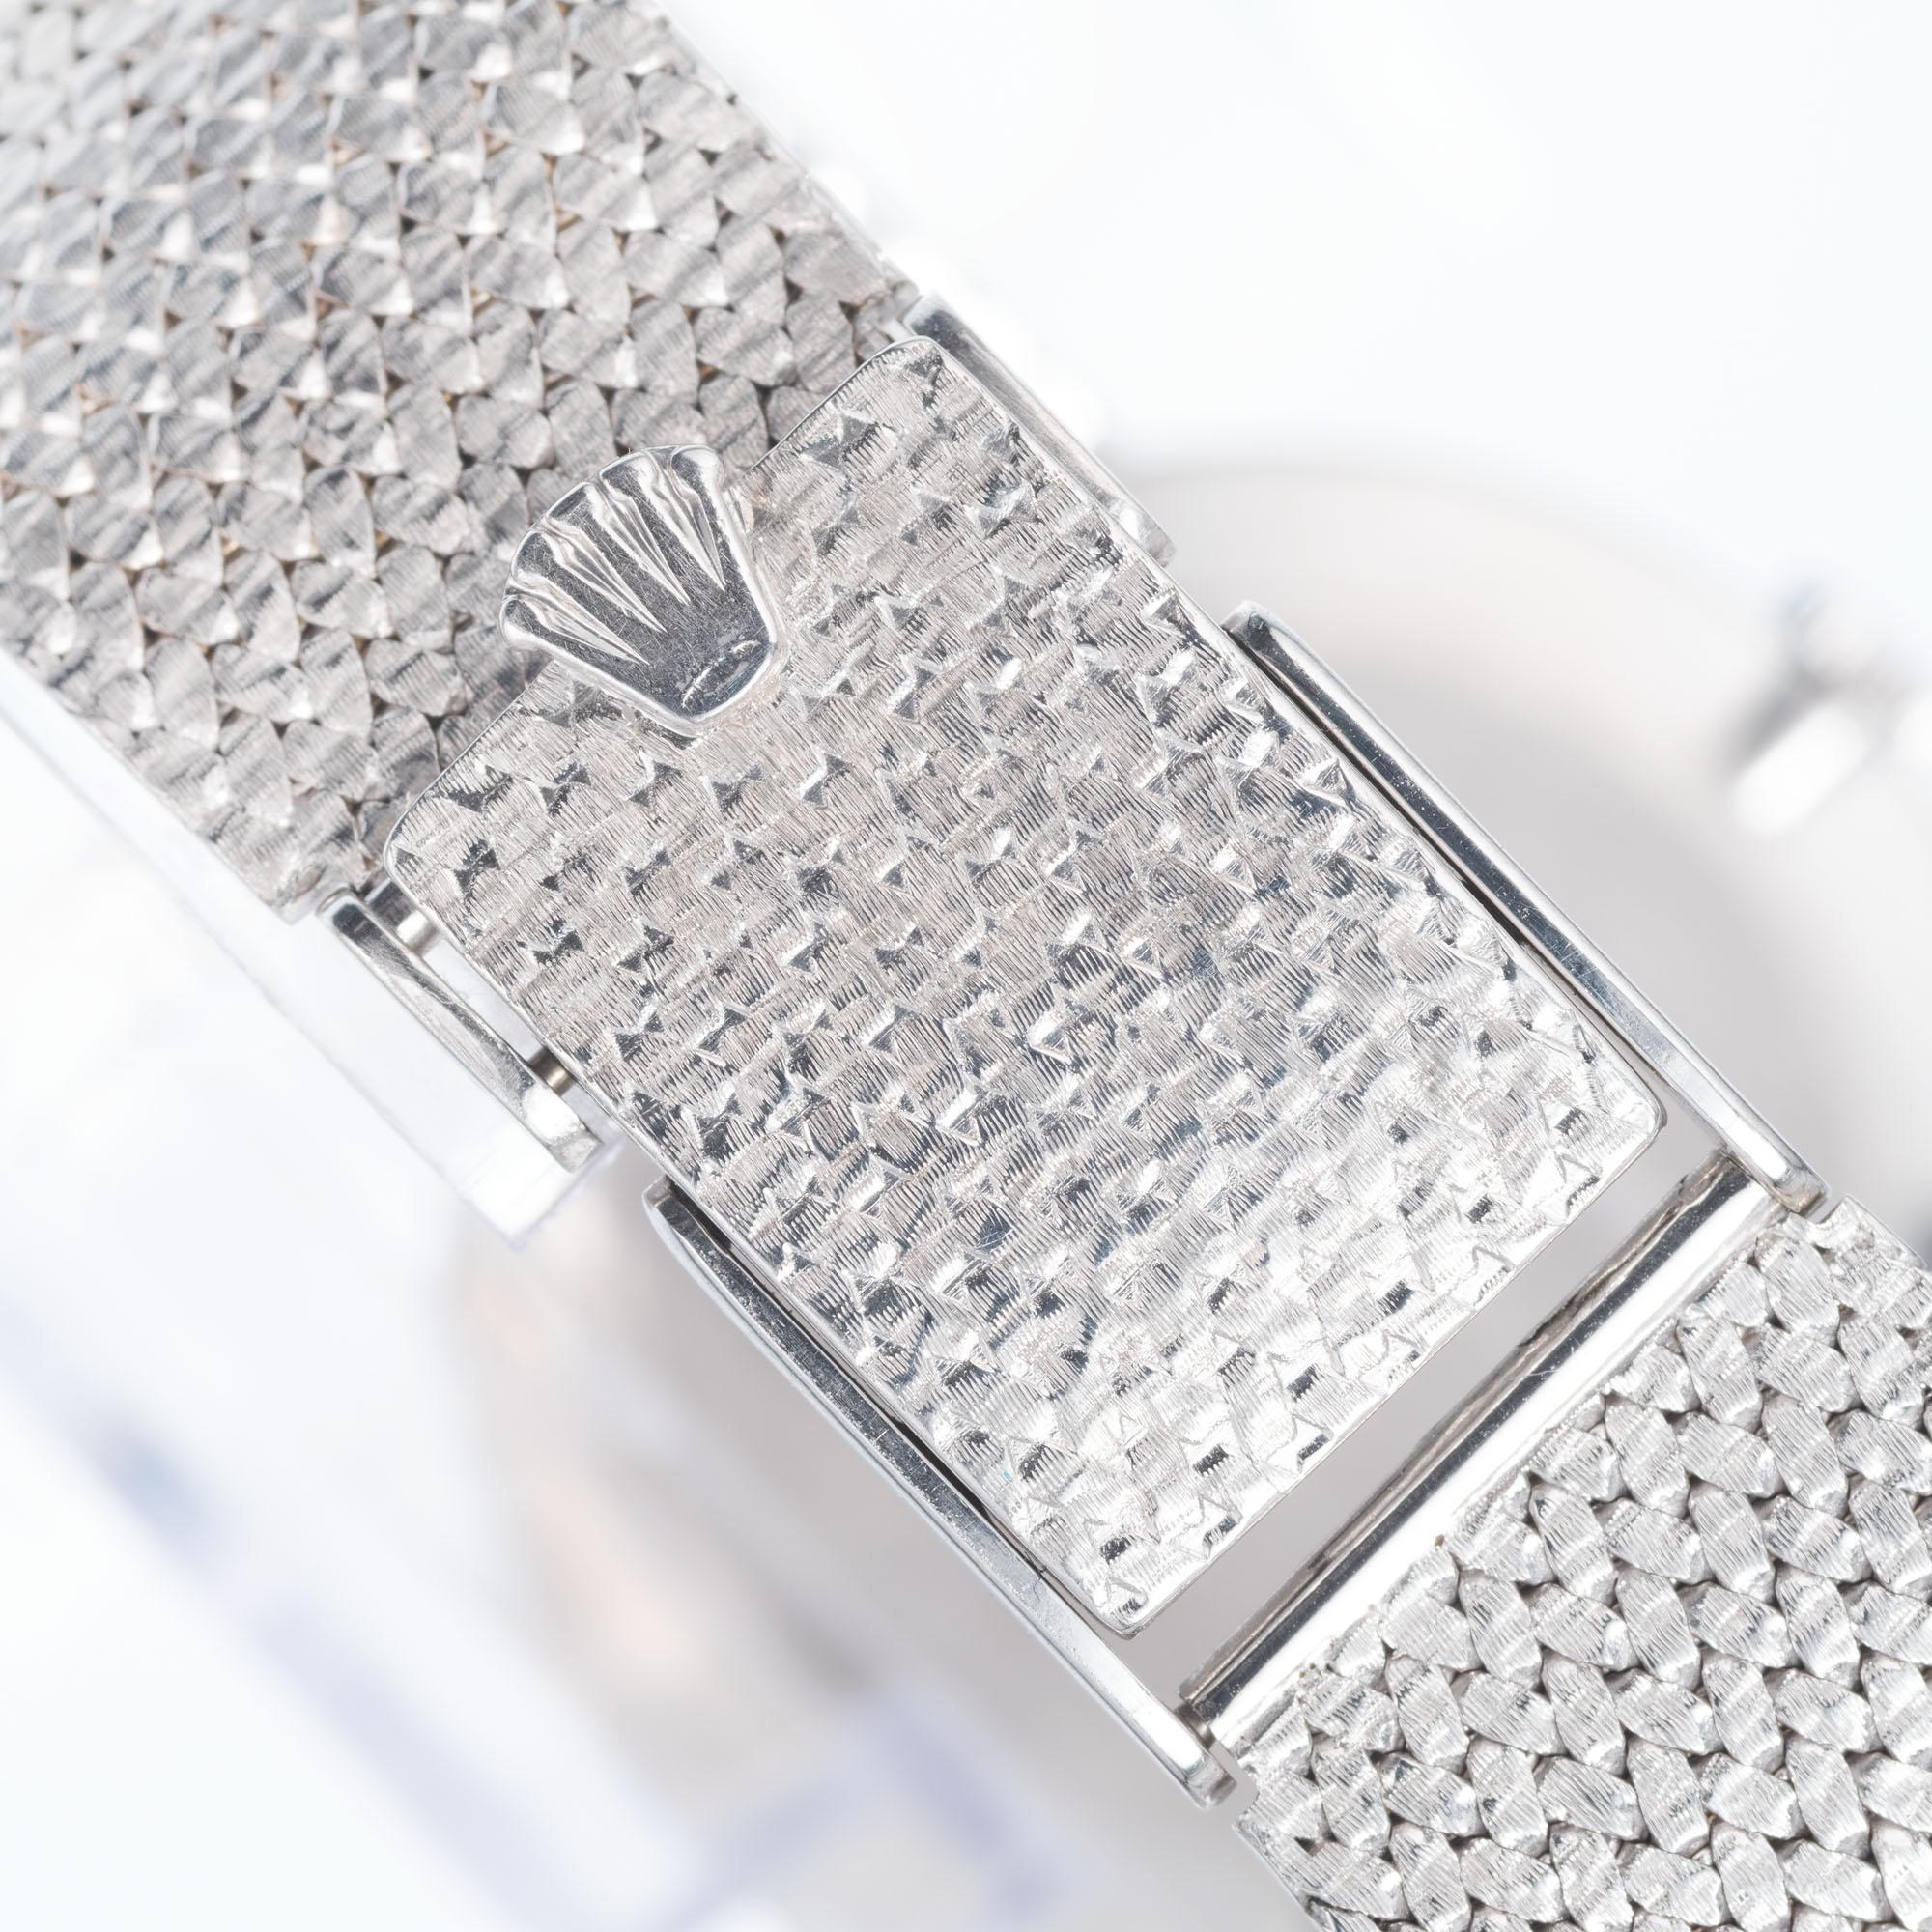 Rolex Cellini 18k white gold mesh band white dial wristwatch. 

Length: 7 ¾ Inches – can be shortened
Length: 31.02mm
Width: 30.52mm
Band width at case: 18.11mm
Case thickness: 51.1mm
Band: 18k white gold mesh
Crystal: sapphire
Dial: white with